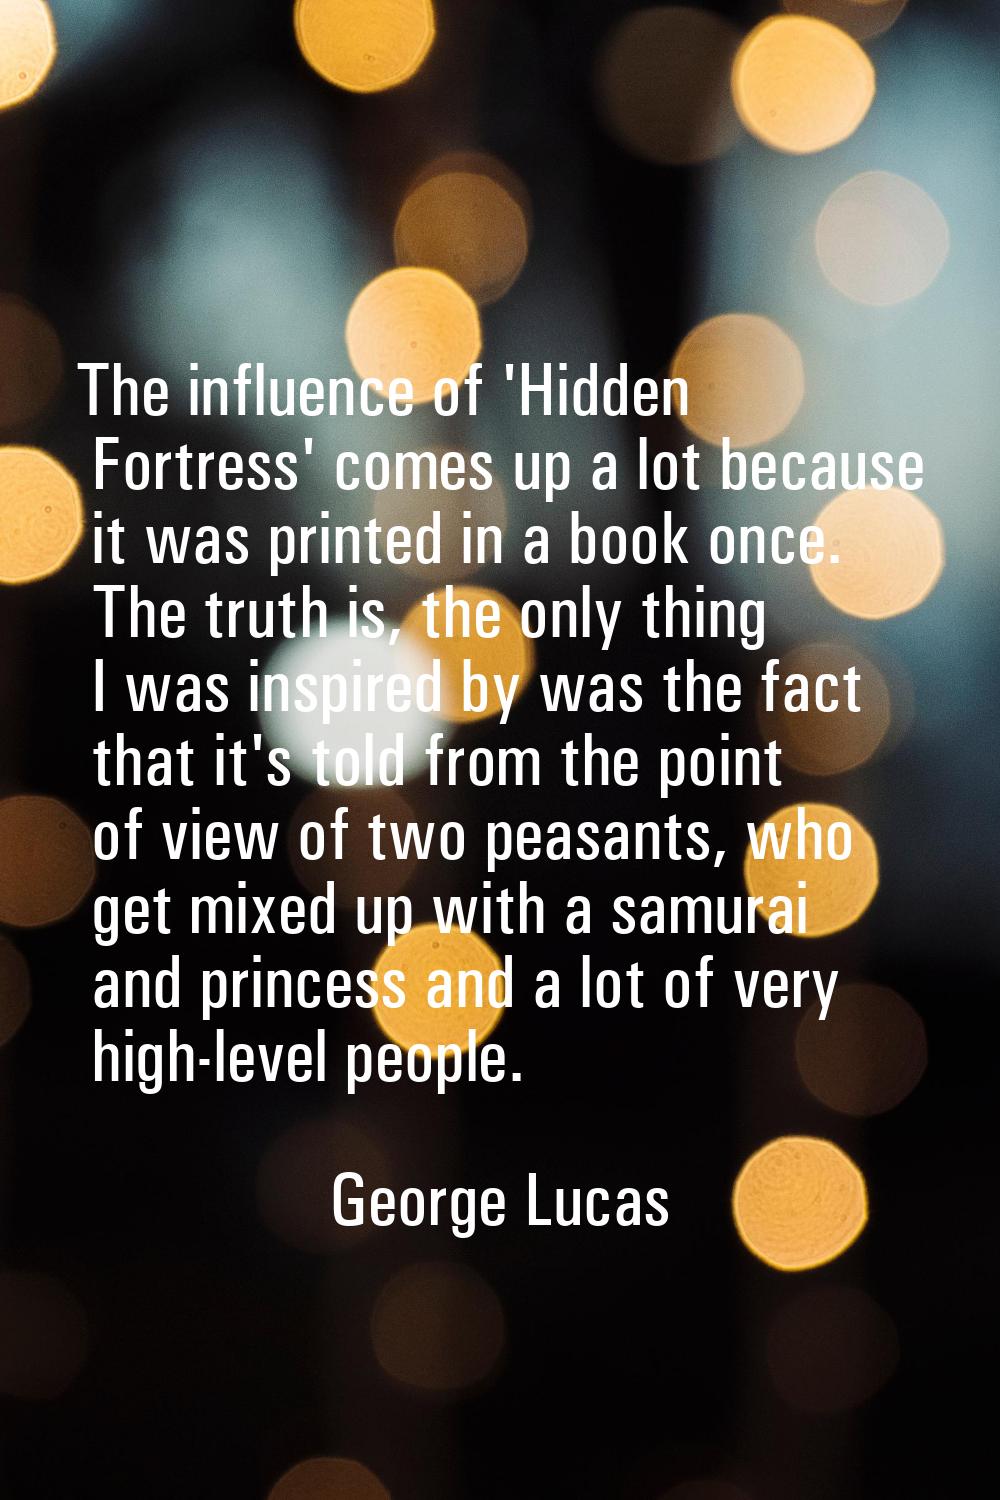 The influence of 'Hidden Fortress' comes up a lot because it was printed in a book once. The truth 